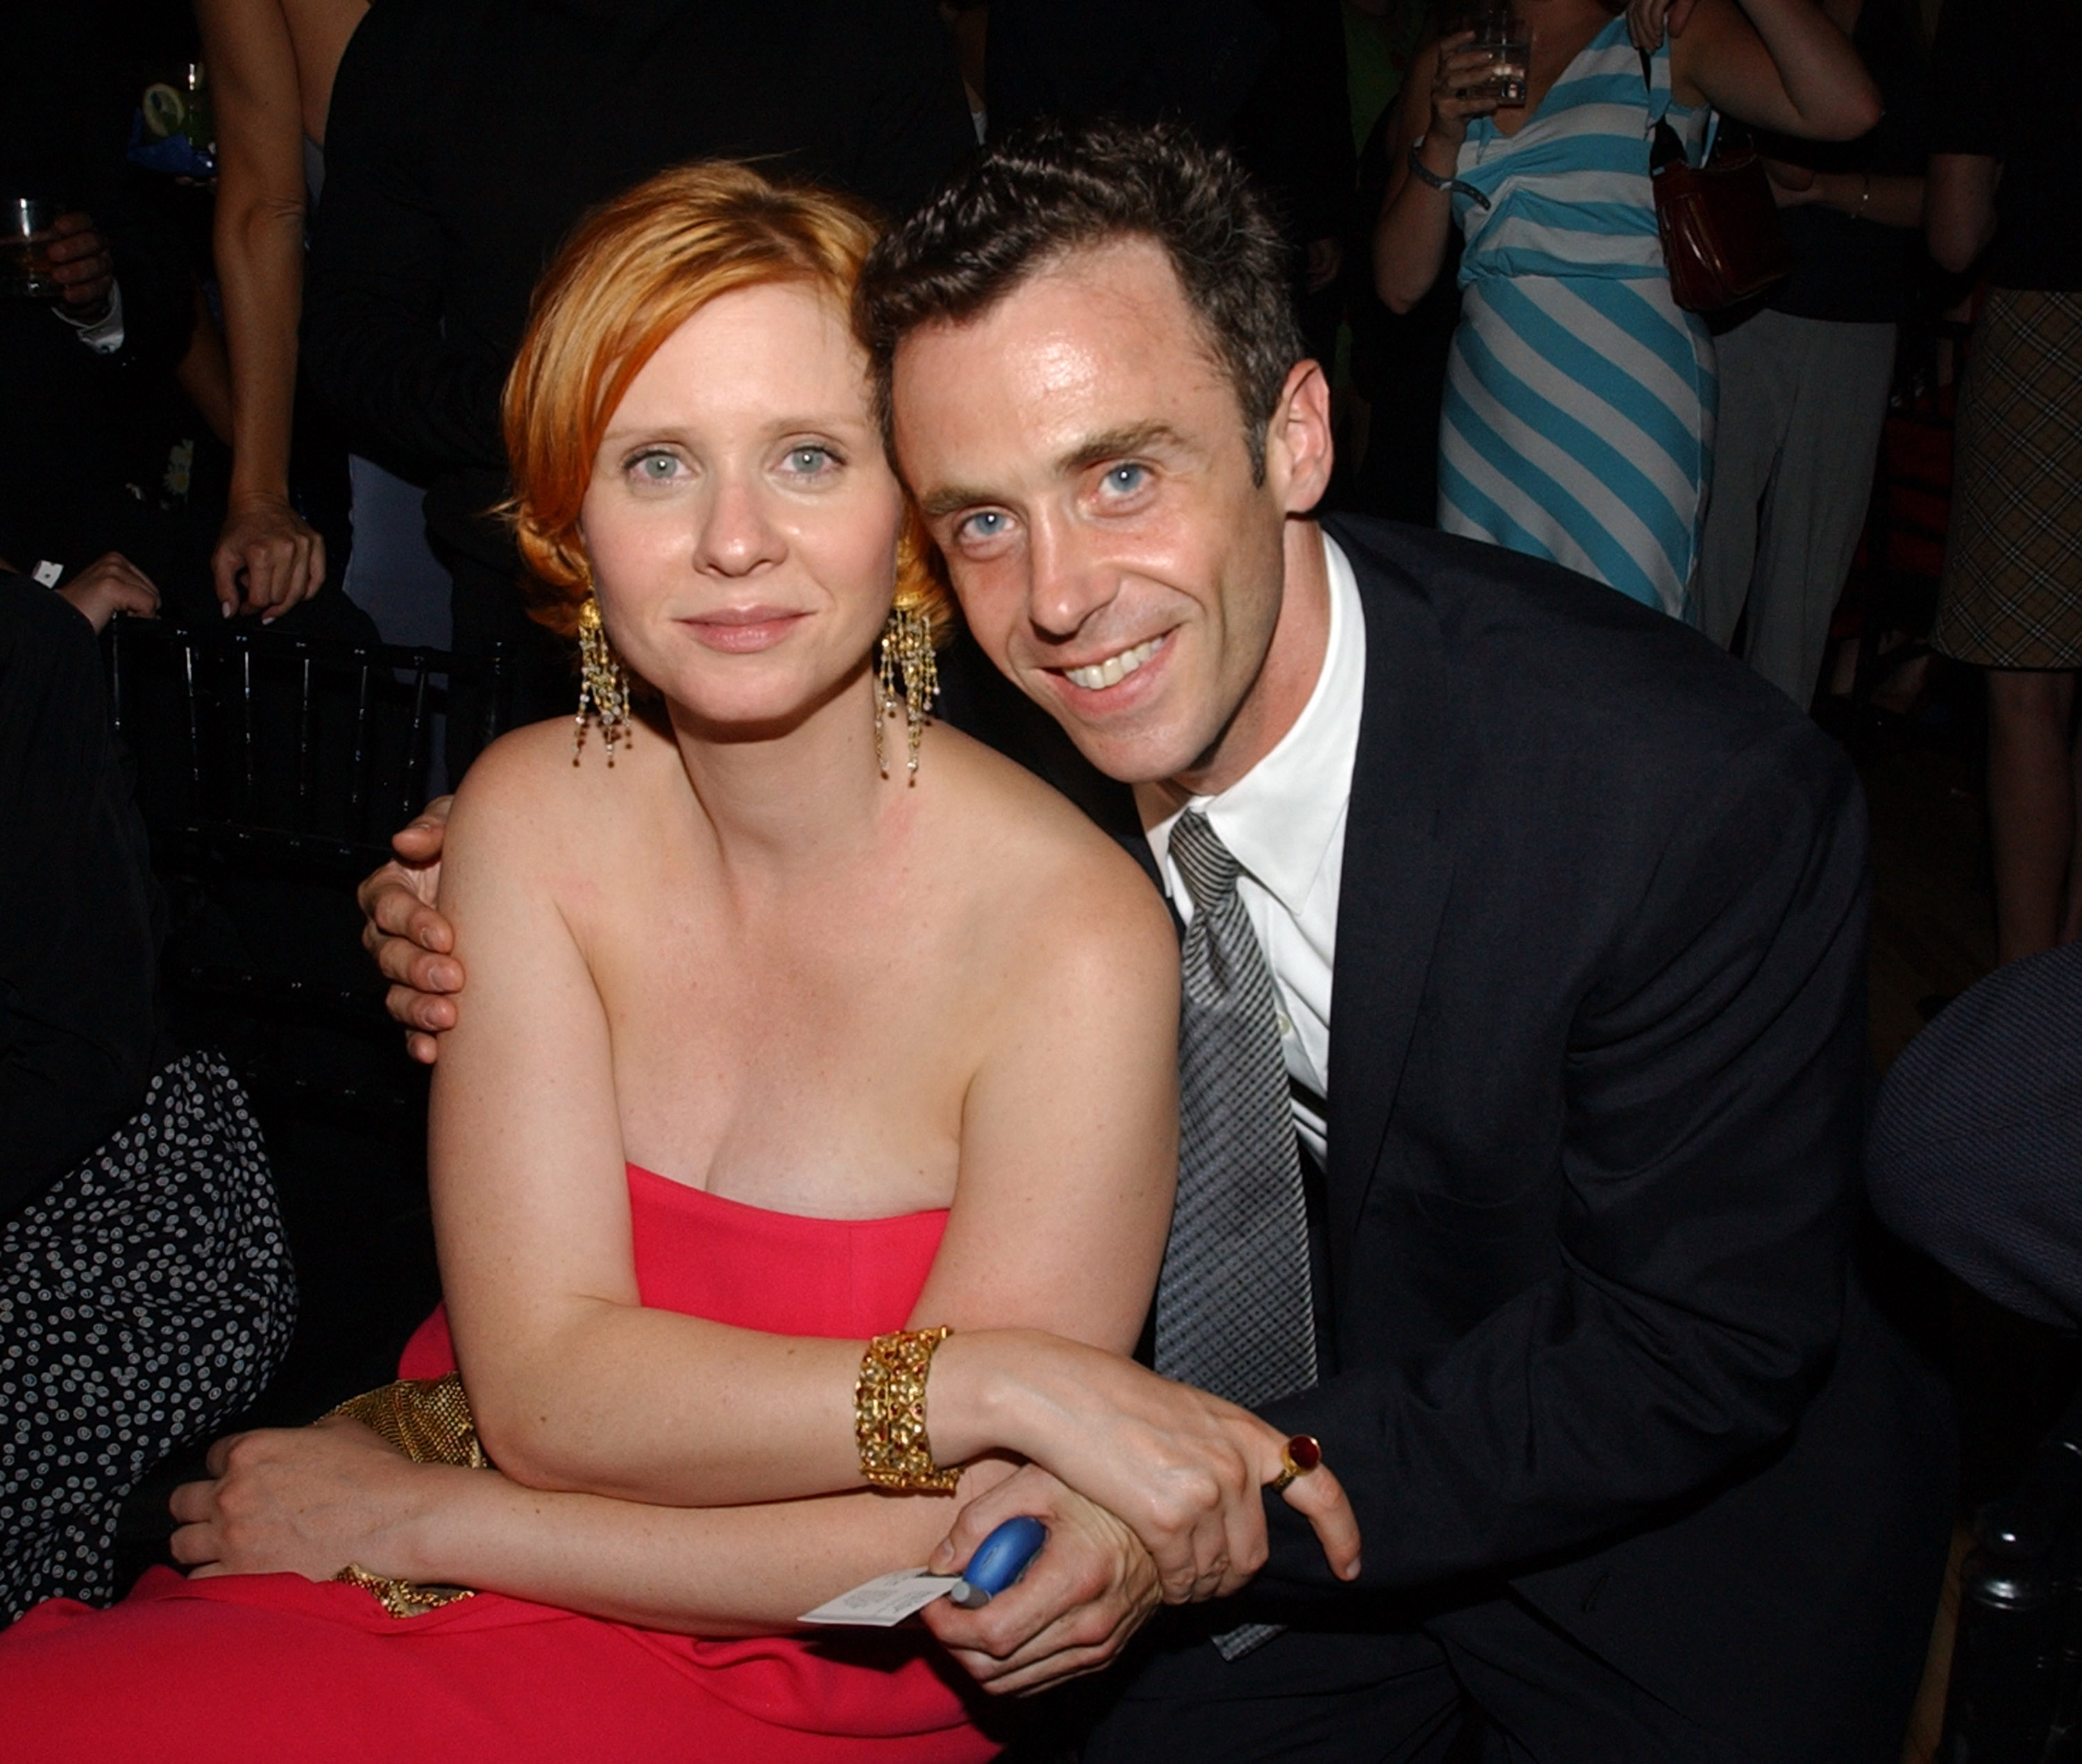 Cynthia Nixon and David Eigenberg together at the season 5 premiere of 'Sex and the City'